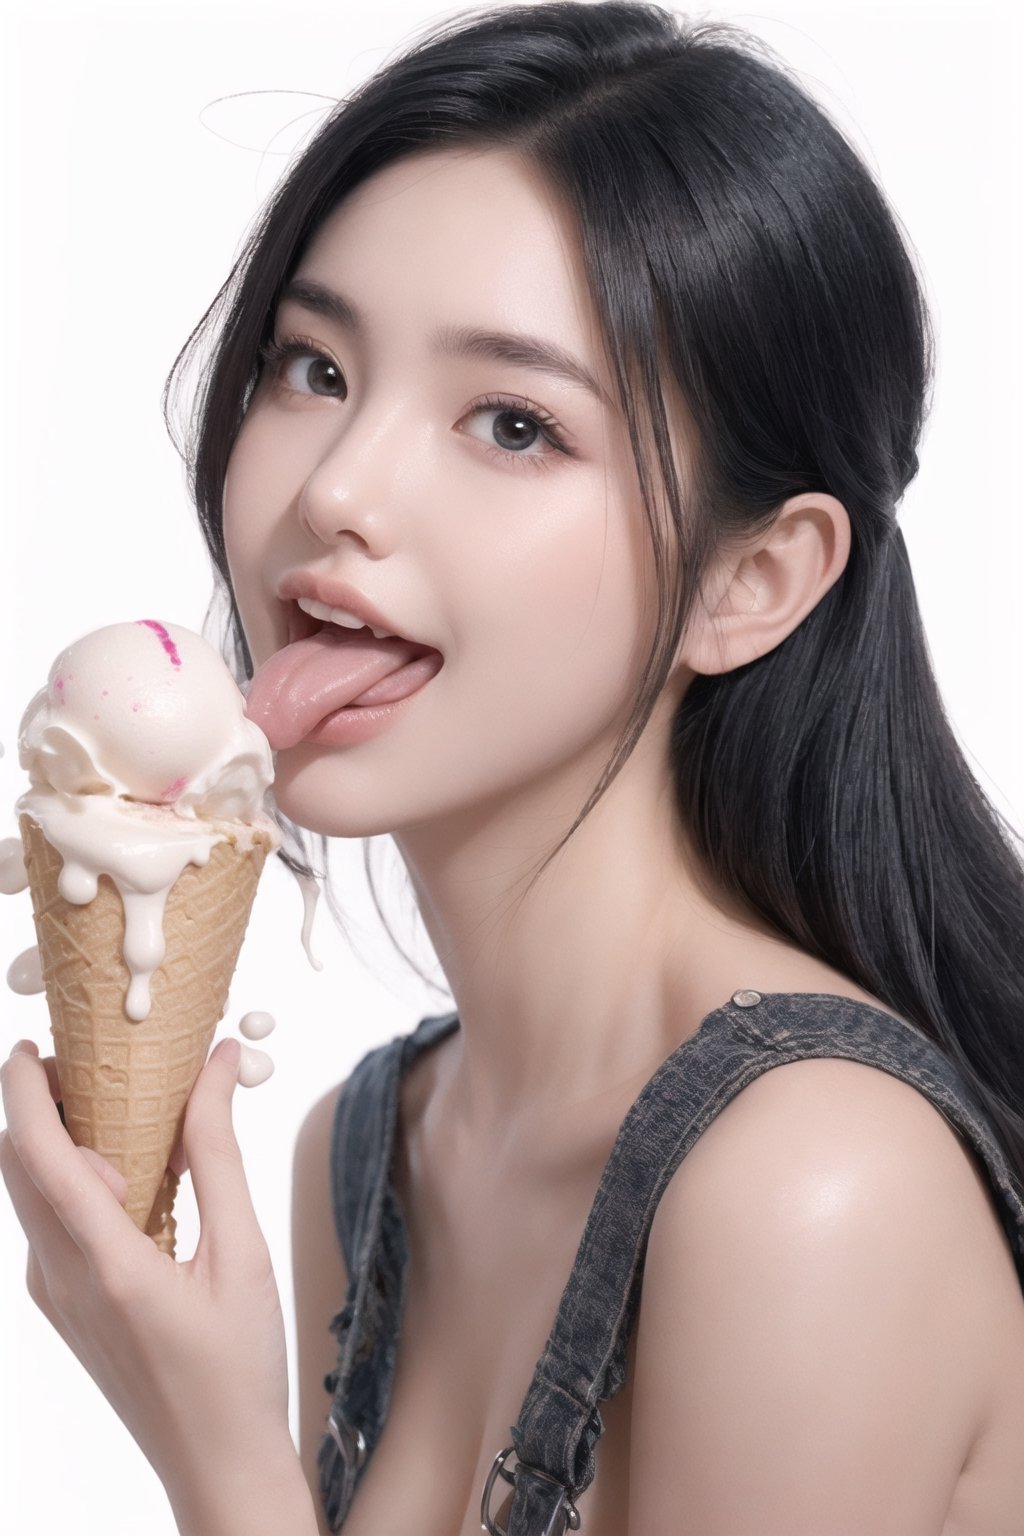 front view, a girl wearing overalls, licking an ice cream with her tongue against a white background,
big ice cream cone,ice cream,(naked body:1.3)

(Beautiful and detailed eyes),
Detailed face, detailed eyes, double eyelids ,thin face, real hands,
((black long hair :1.2)),white skin, gigantic_breasts, white teeth,naked feet,air bangs,


,1 girl, real person, color splash style photo,
,tongue out,ahegao face